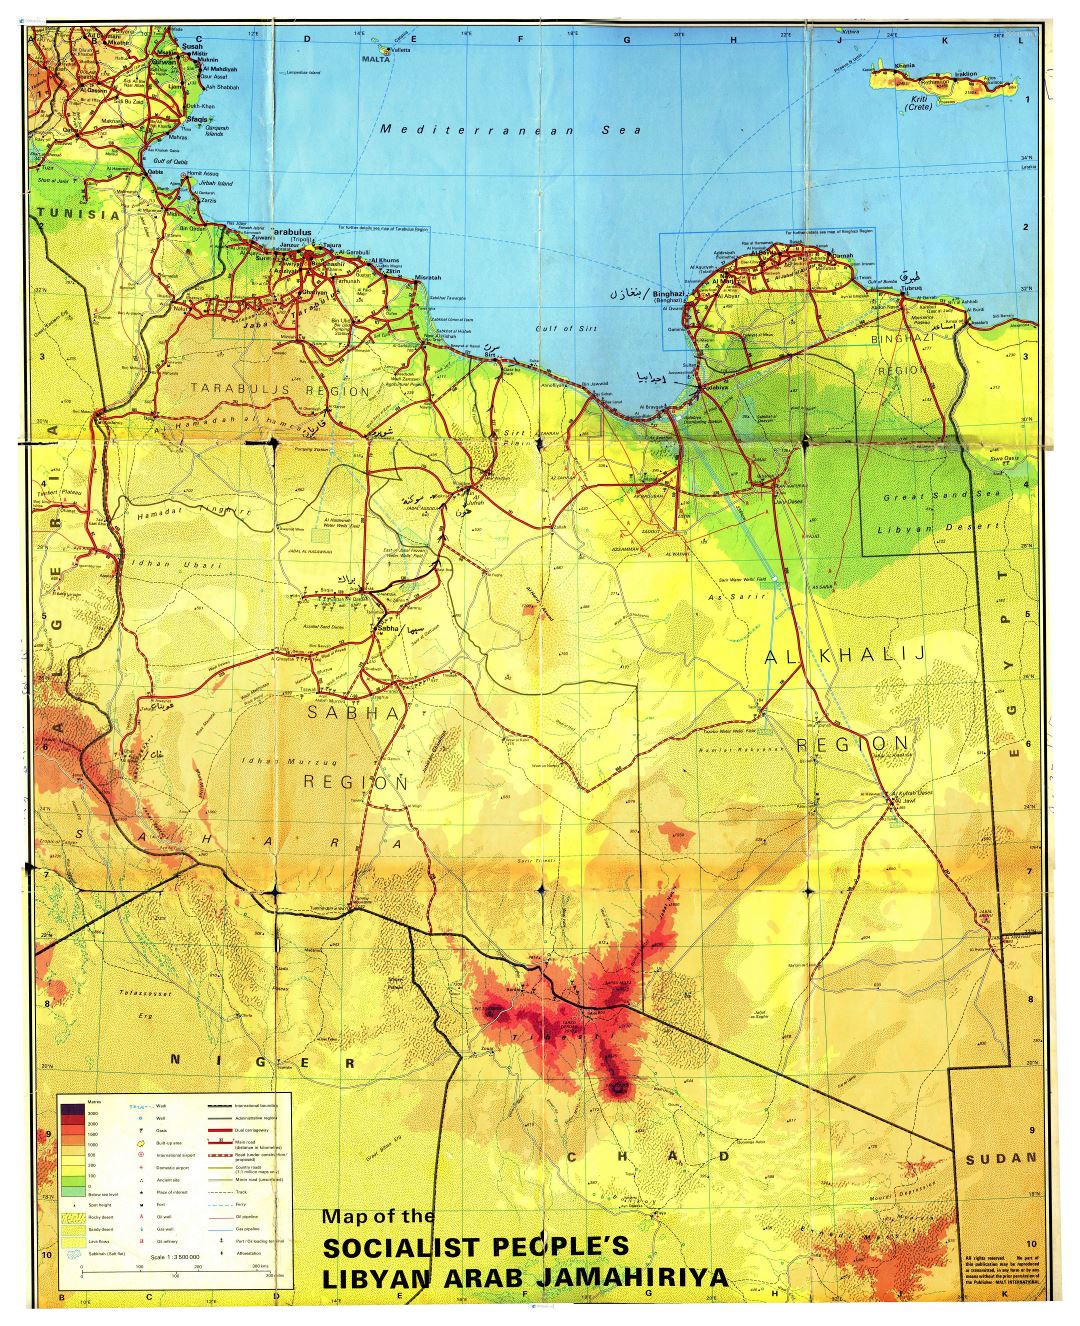 Large scale physical map of Libya with roads, cities and other marks